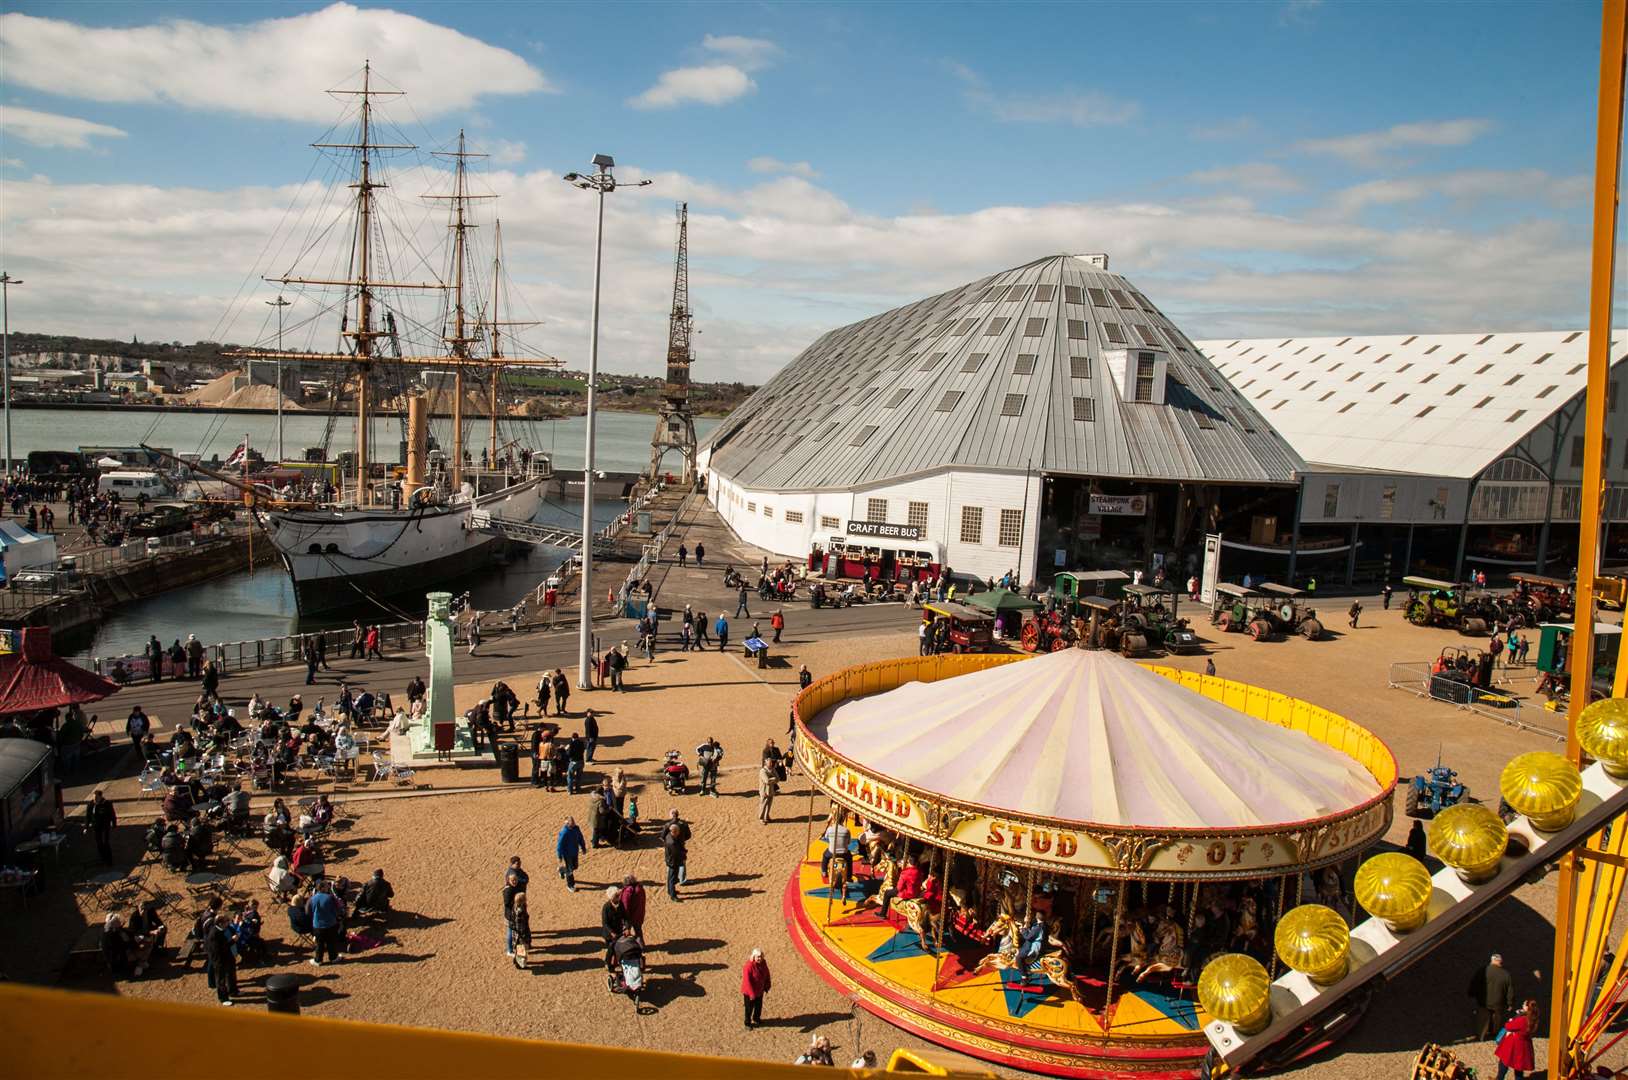 Chatham Historic Dockyard will host the festival next March